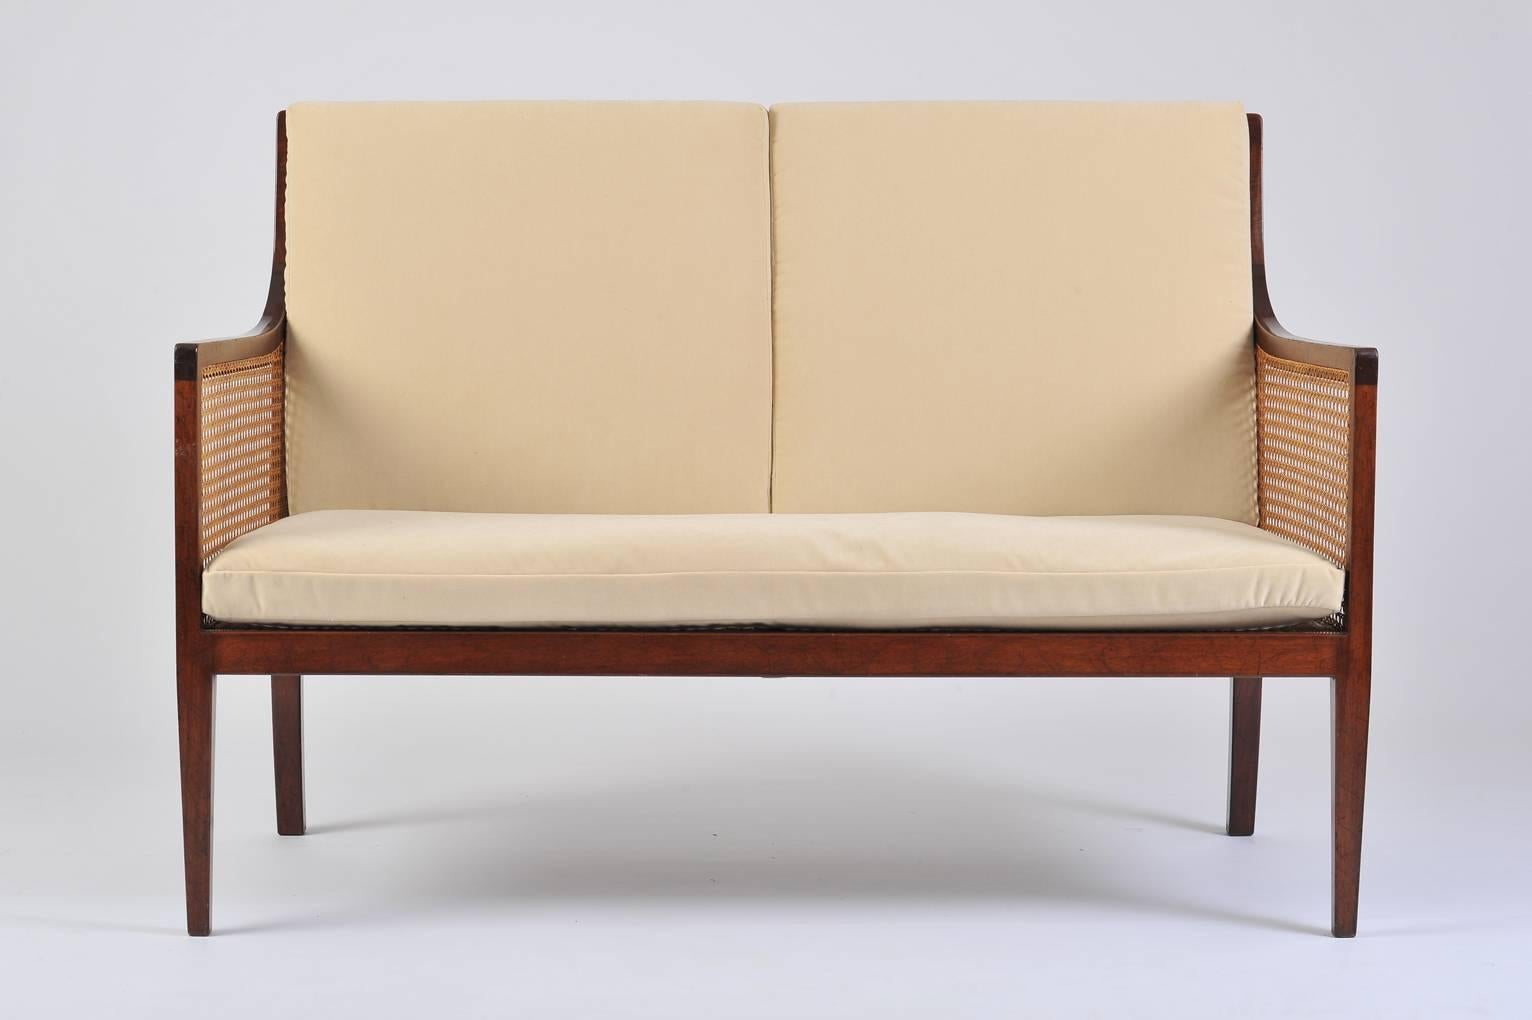 A cane and mahogany two-seat sofa
Sweden, circa 1920.